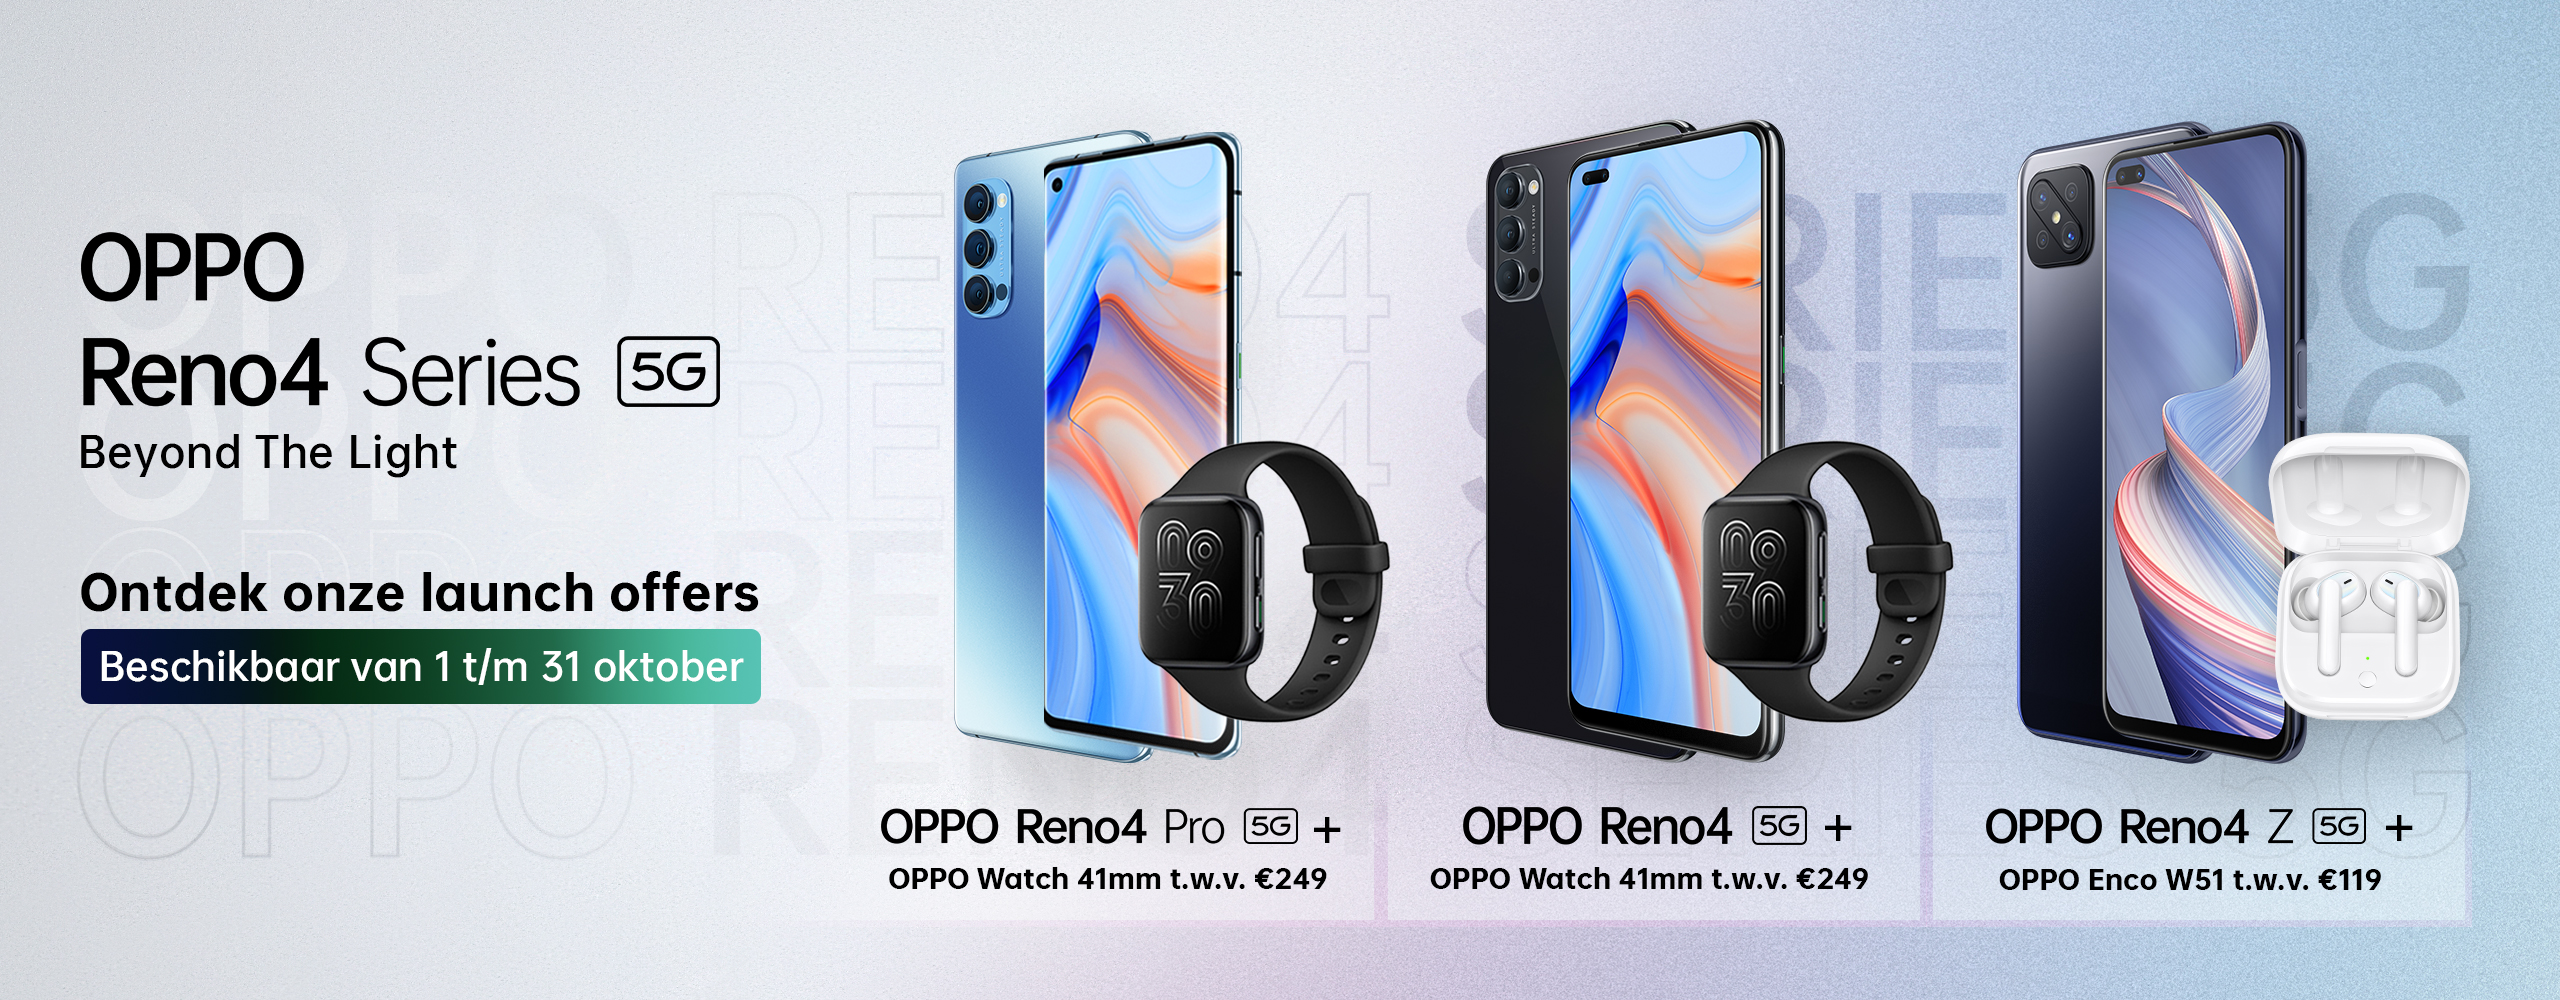 OPPO Reno4 Series 5G - Launch Offer